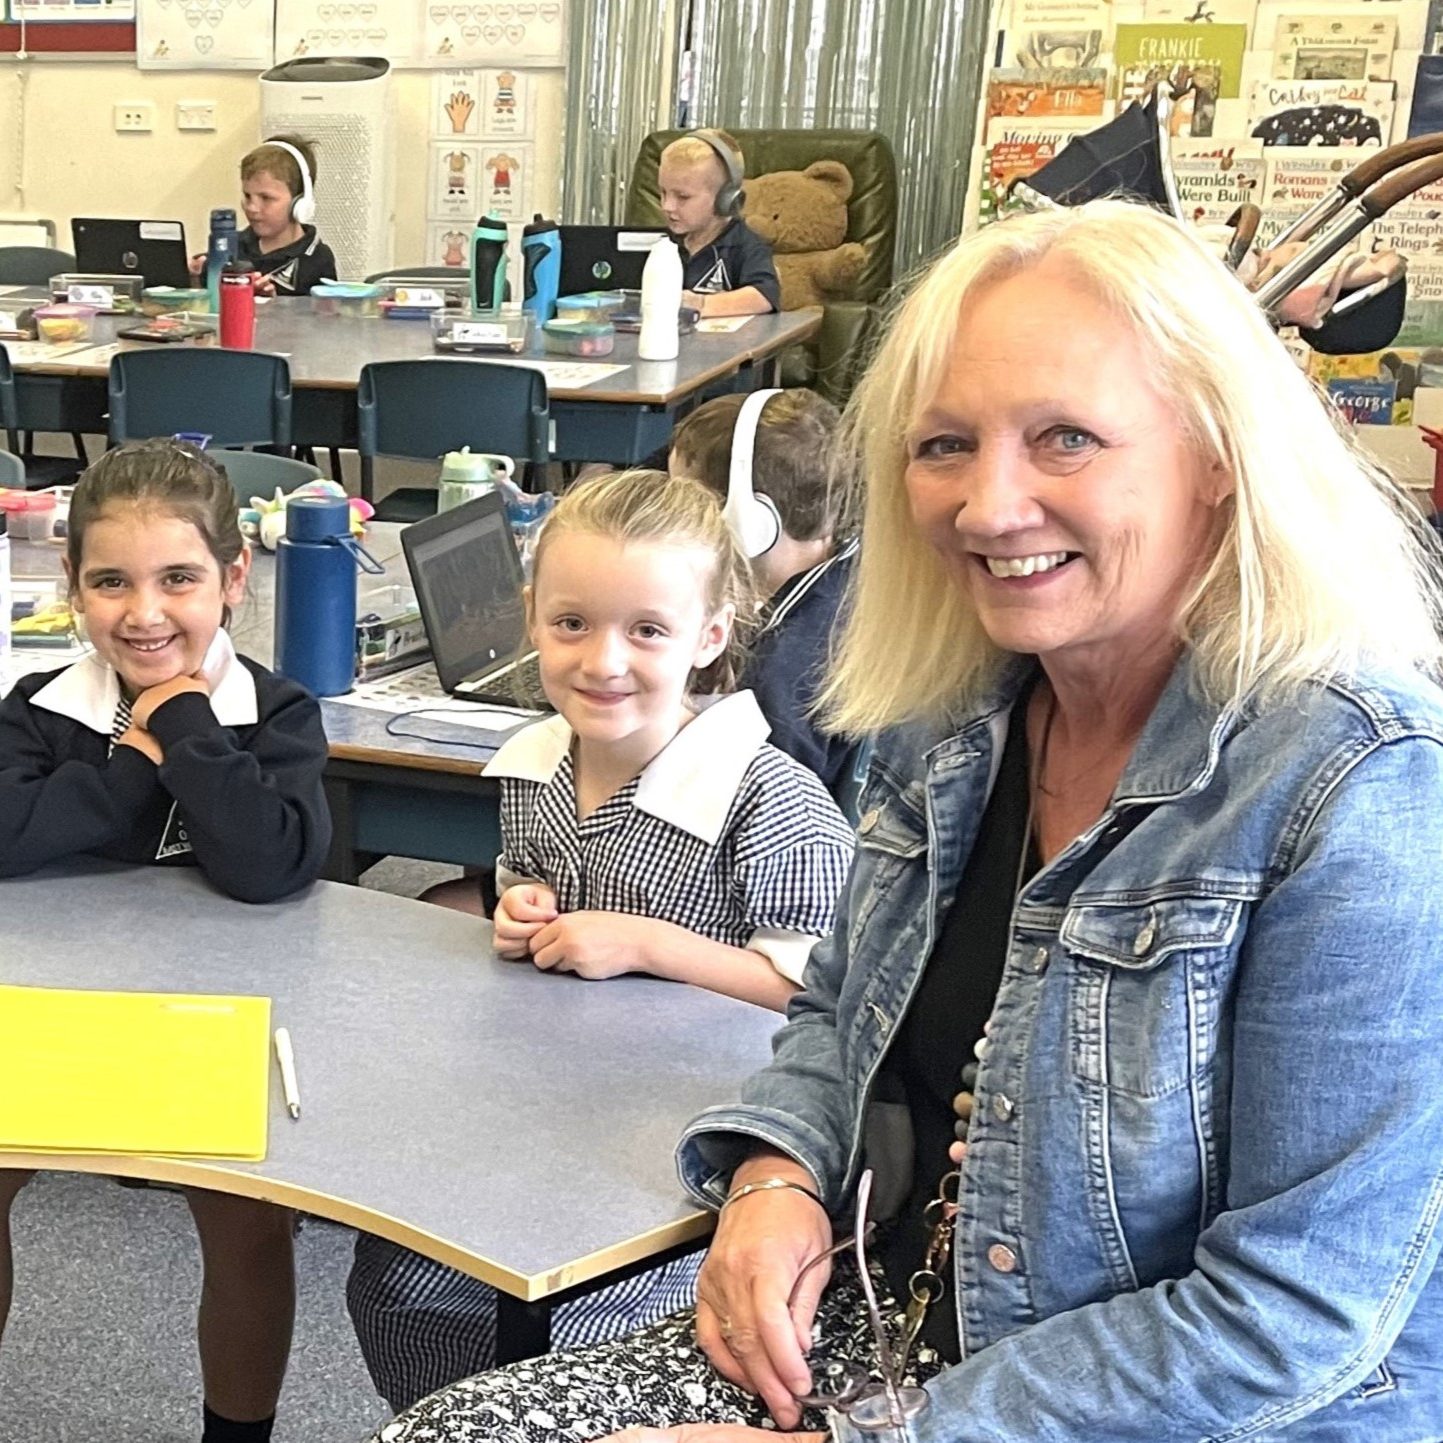 Foundation teacher Sharon Dwyer, from Our Lady Help of Christians School (OLHC), Warrnambool, was nominated for an award by her school community for 'Empowering all to Flourish'.